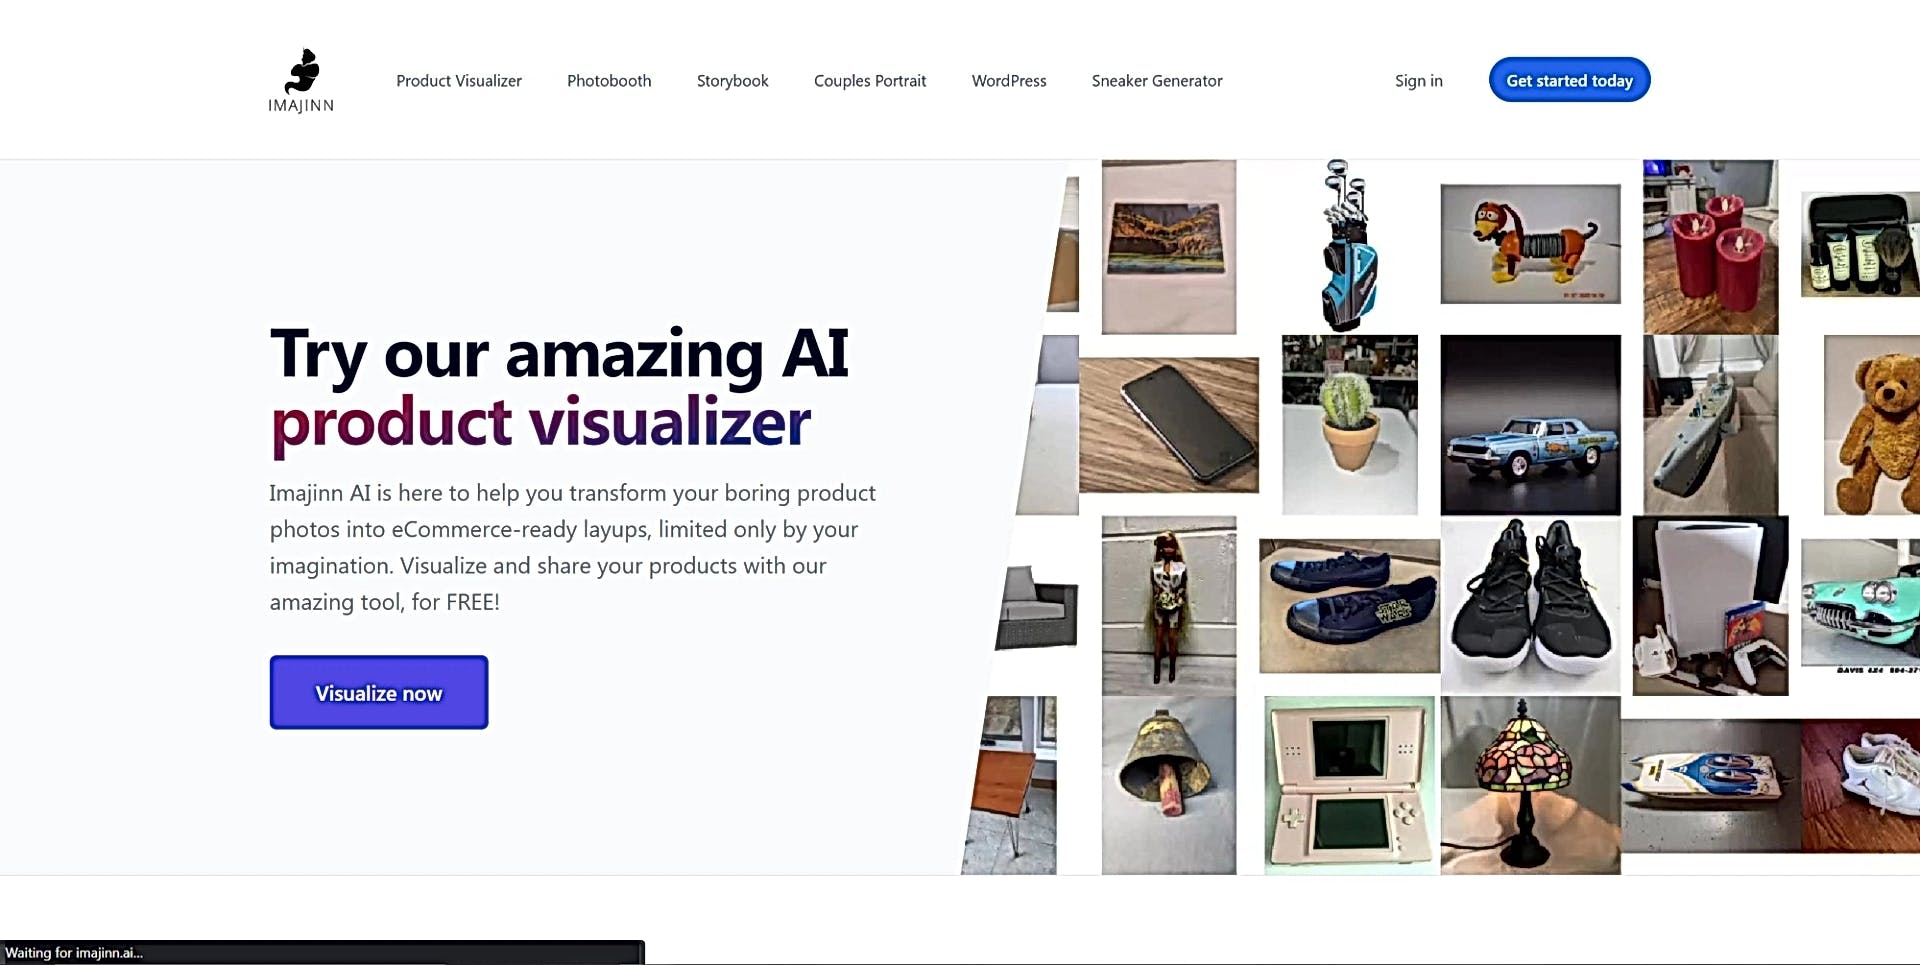 AI Product Visualizer featured